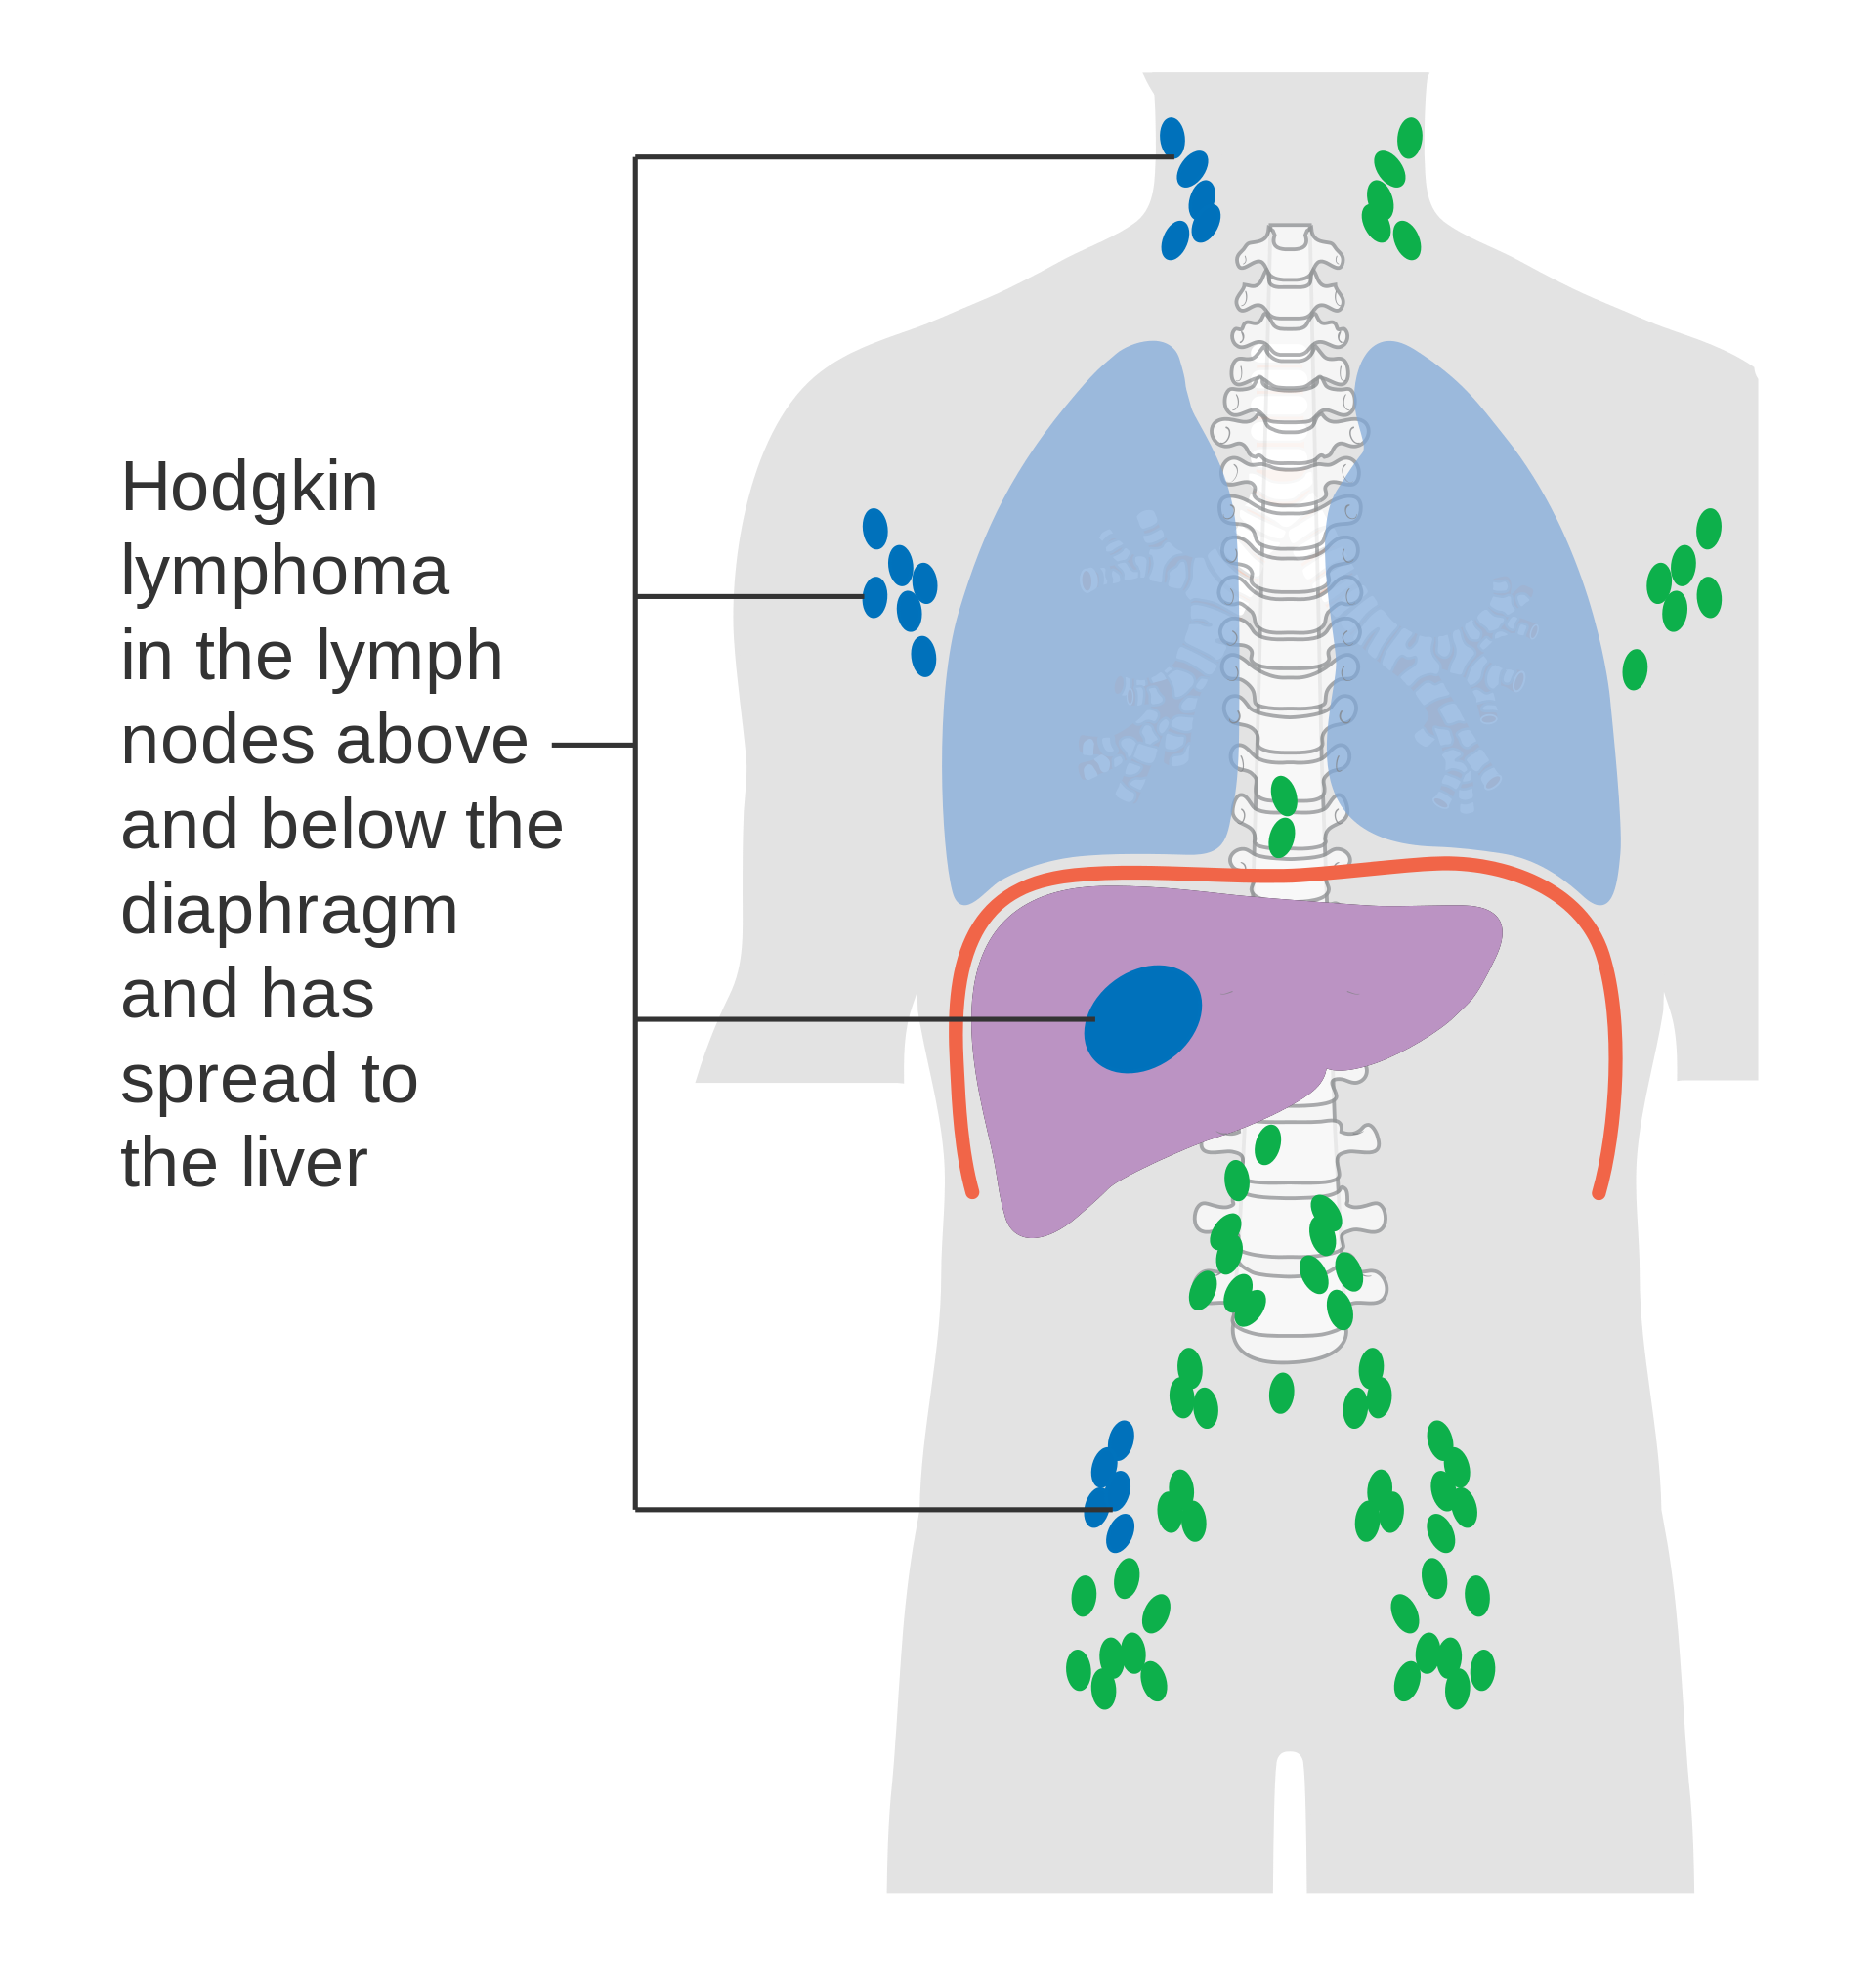 Stage IV Hodgkin lymphoma: lymph nodes above and below the diaphragm are affected and cancer has spread to the liver